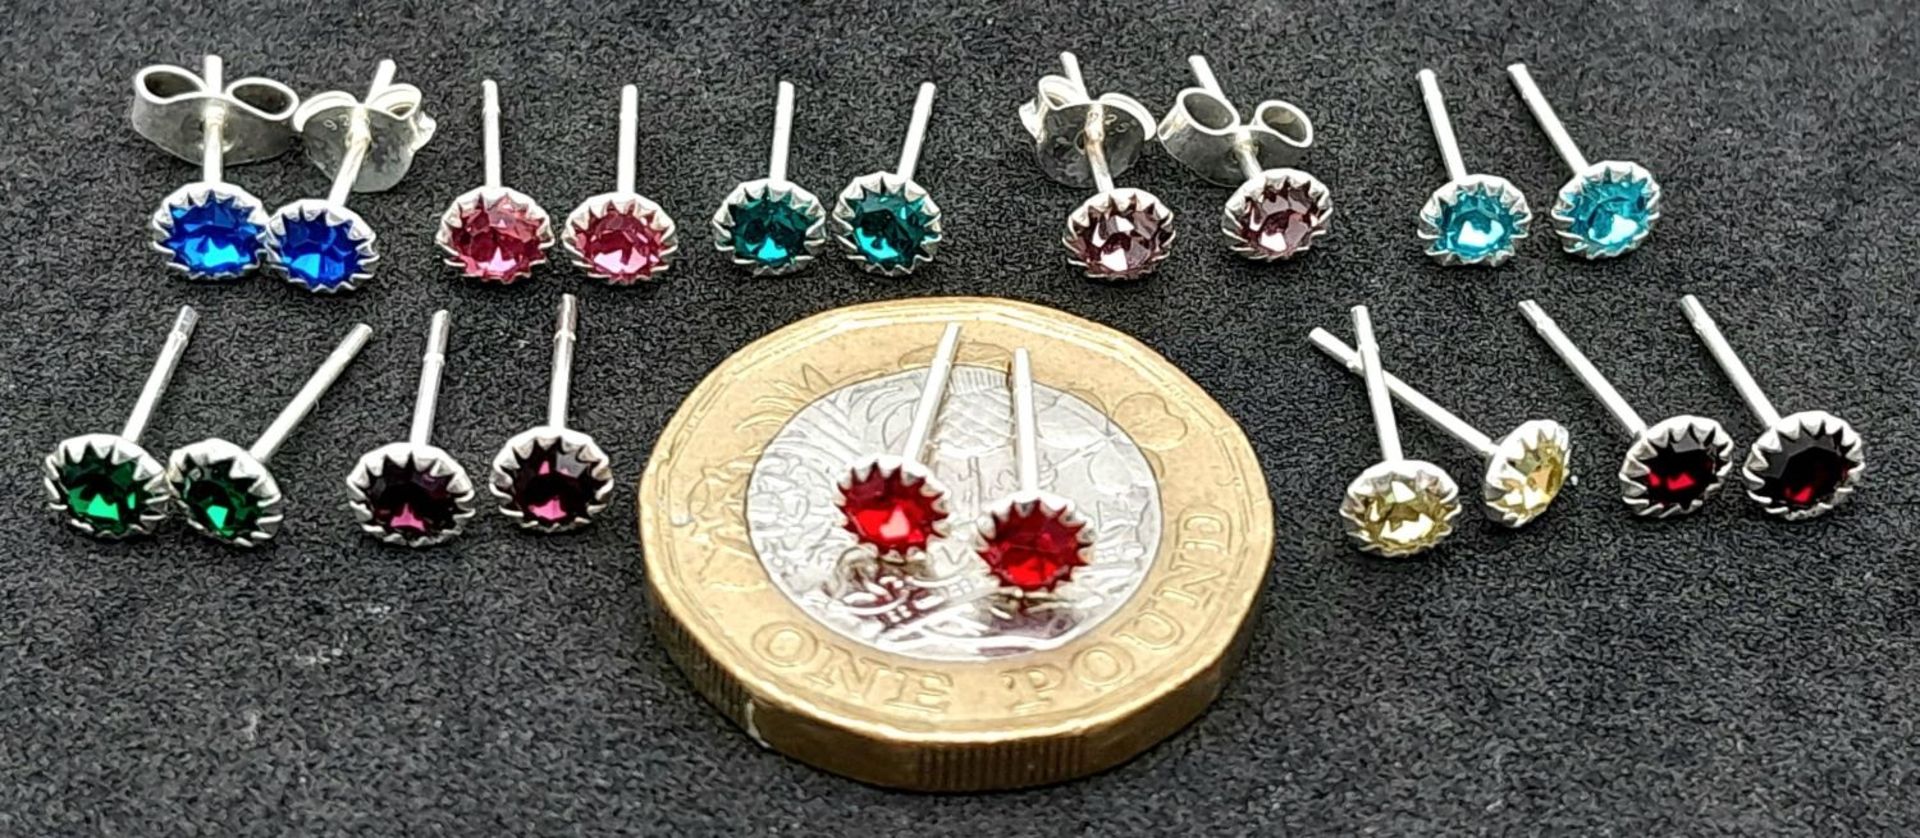 10 PAIRS OF STERLING SILVER STONE SET STUD EARRINGS WITH 2 PAIRS OF SILVER BUTTERFLY BACKS 2.8G. - Bild 4 aus 4